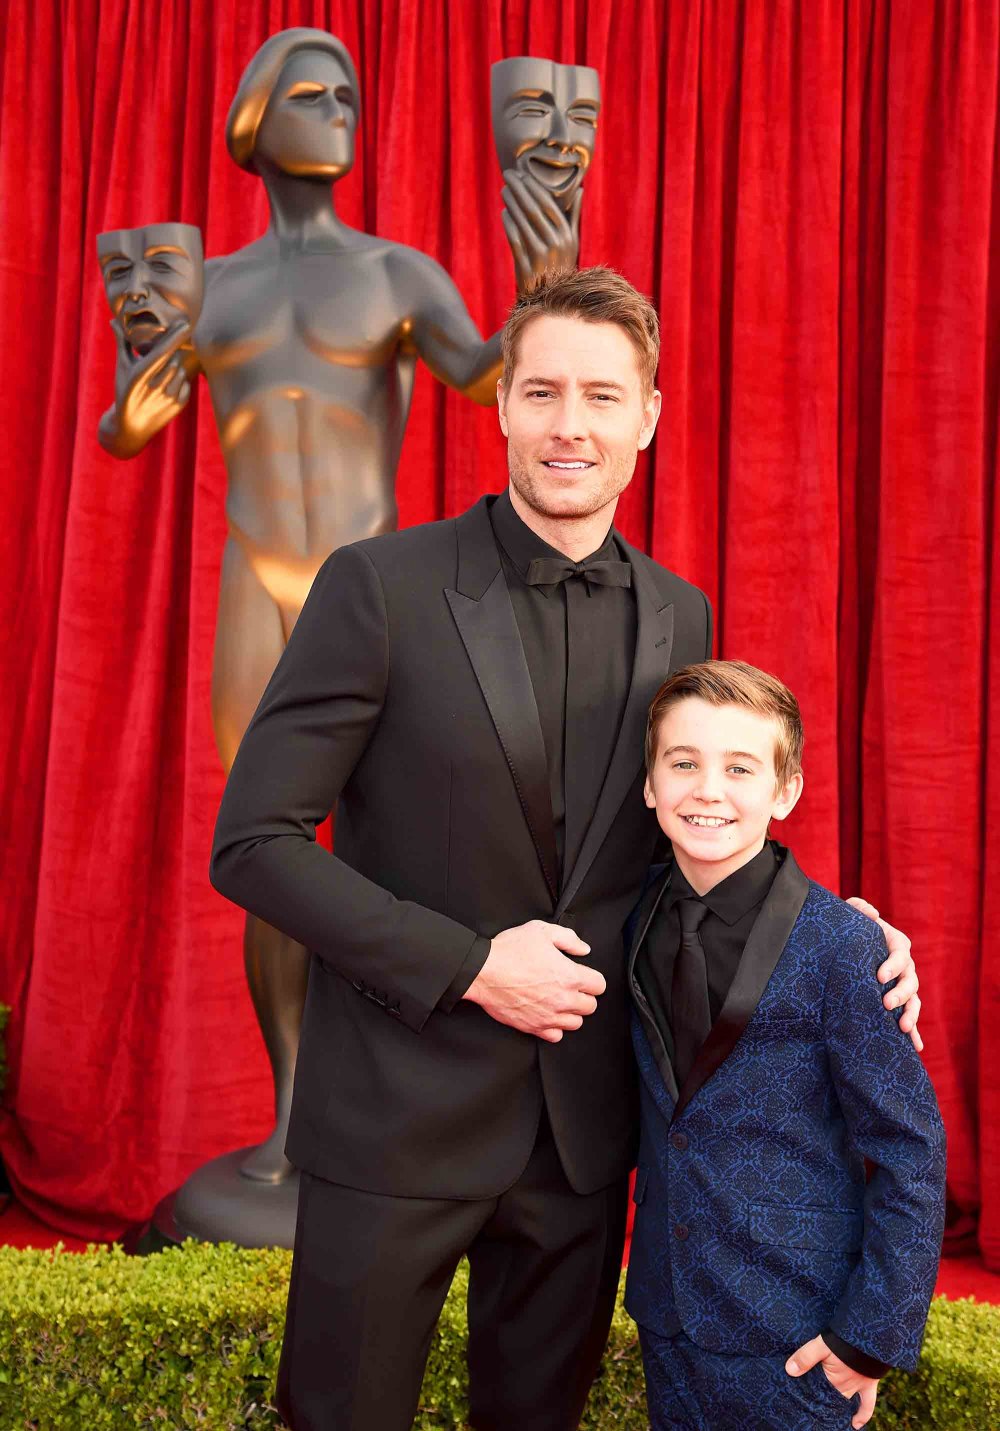 Justin Hartley and Parker Bates attend the 24th Annual Screen Actors Guild Awards at The Shrine Auditorium on January 21, 2018 in Los Angeles, California.